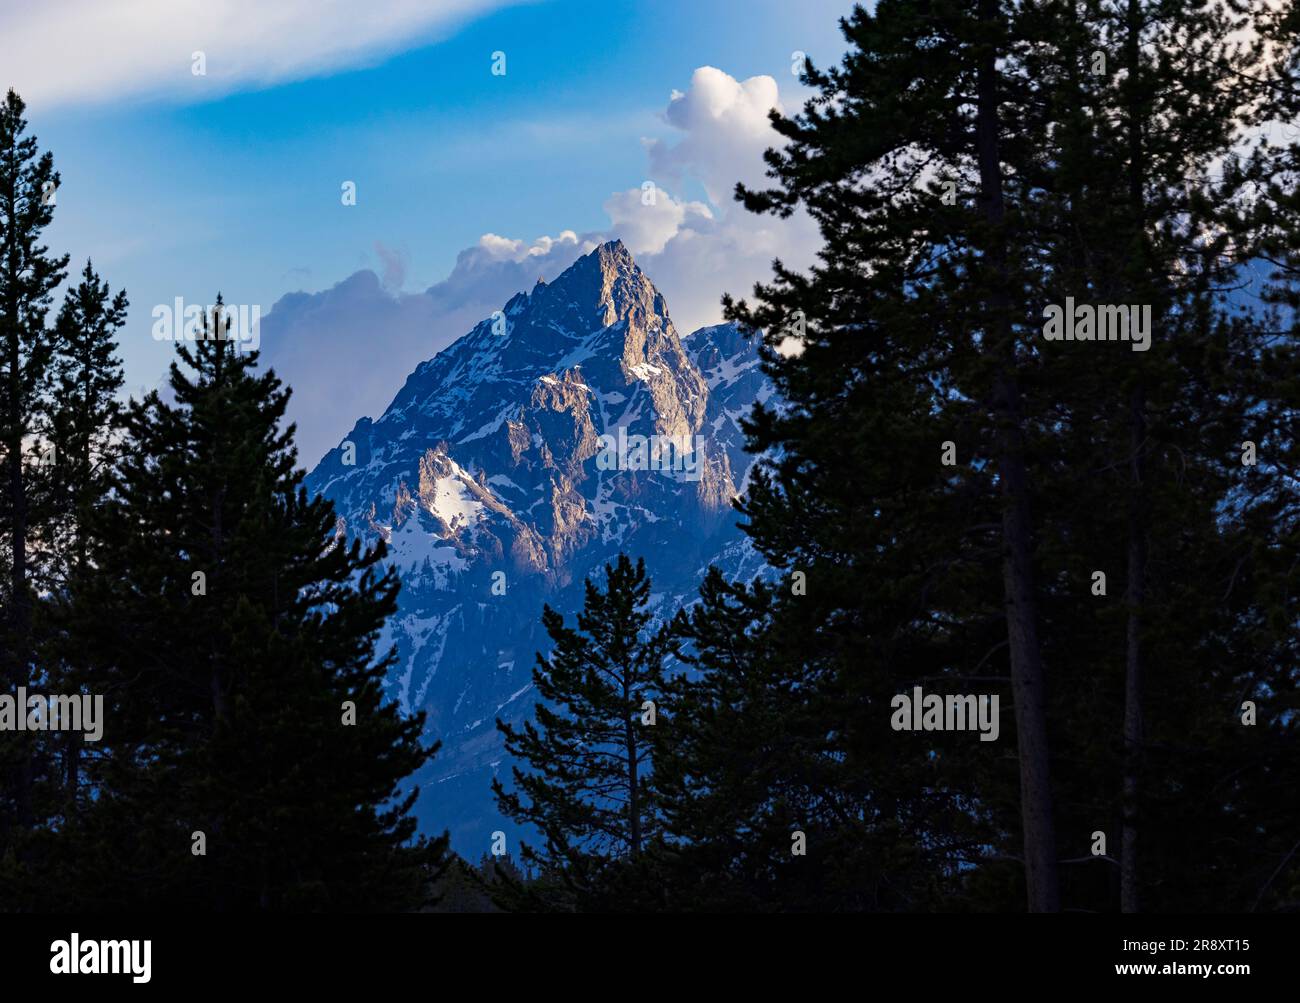 This is majestic Teewinot Mountain framed by the pine trees in the Colter Bay area of Grand Teton National Park, Teton County, Wyoming, USA. Stock Photo